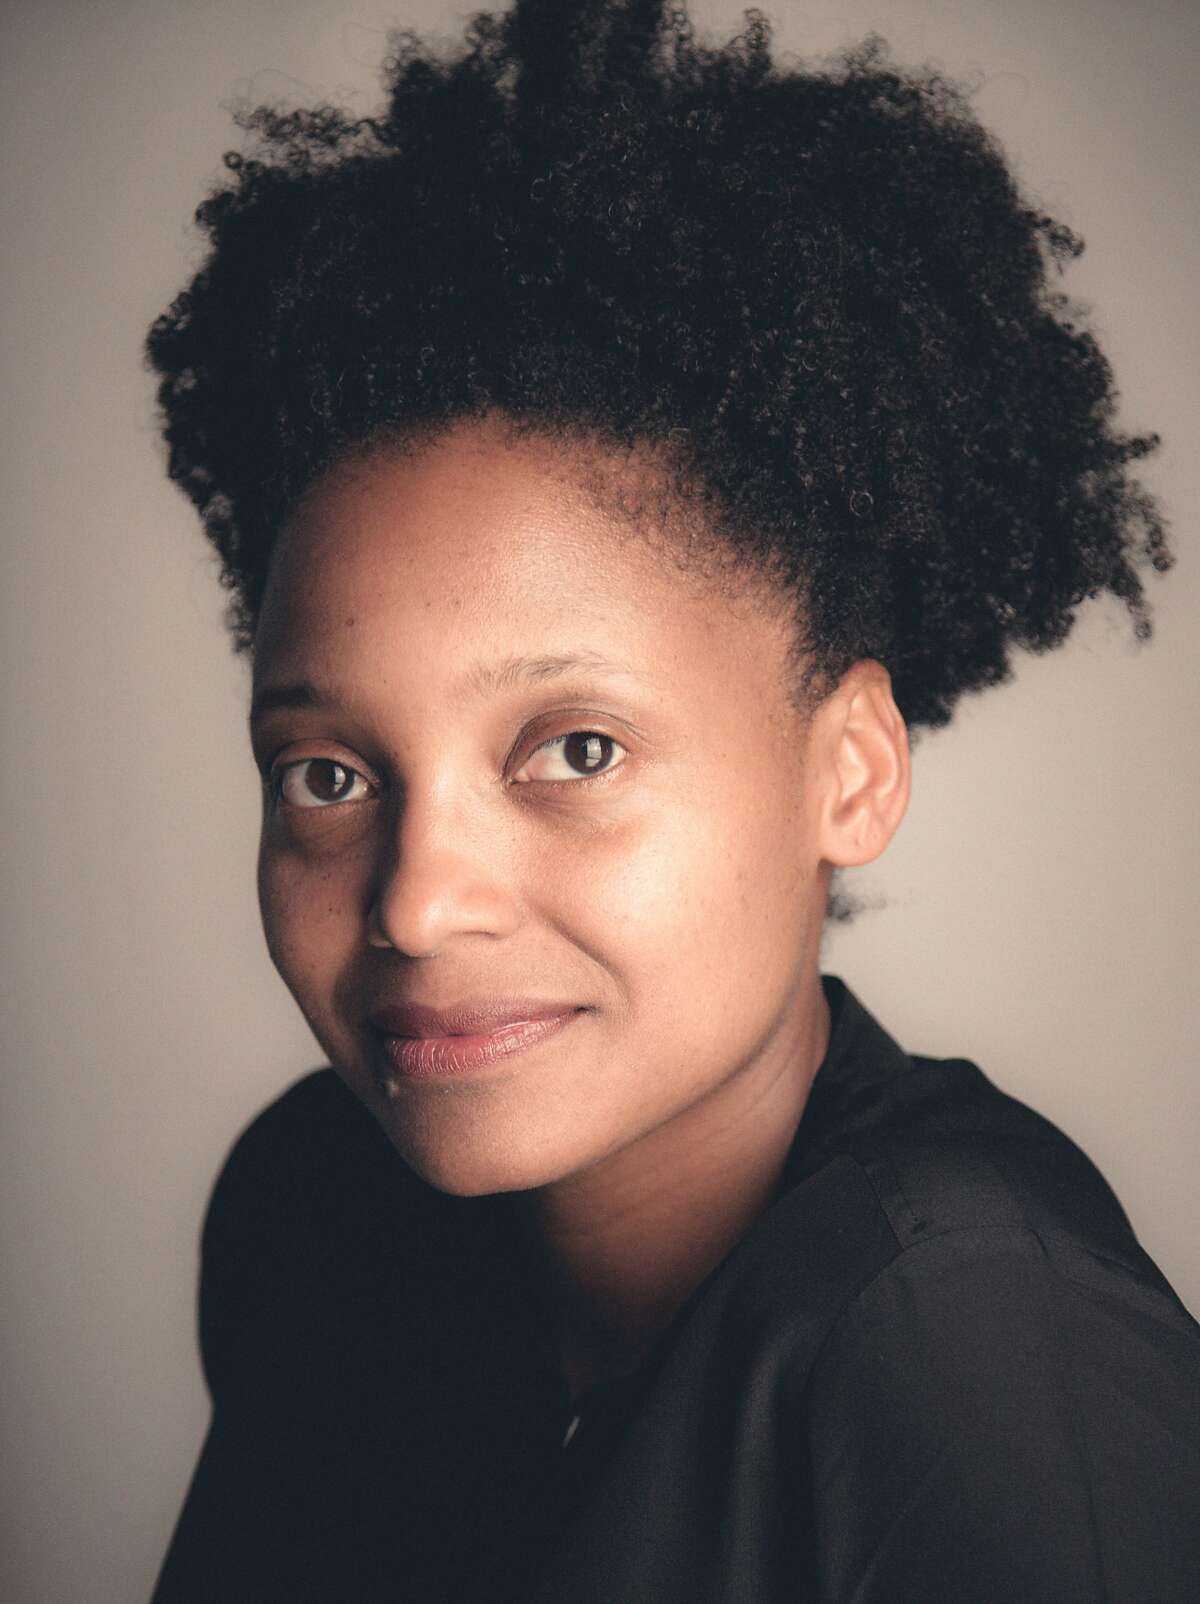 US Poet Laureate Tracy K. Smith reads on Friday, Nov. 3 at California College of the Arts in San Francisco. Photo: Rachel Eliza Griffiths